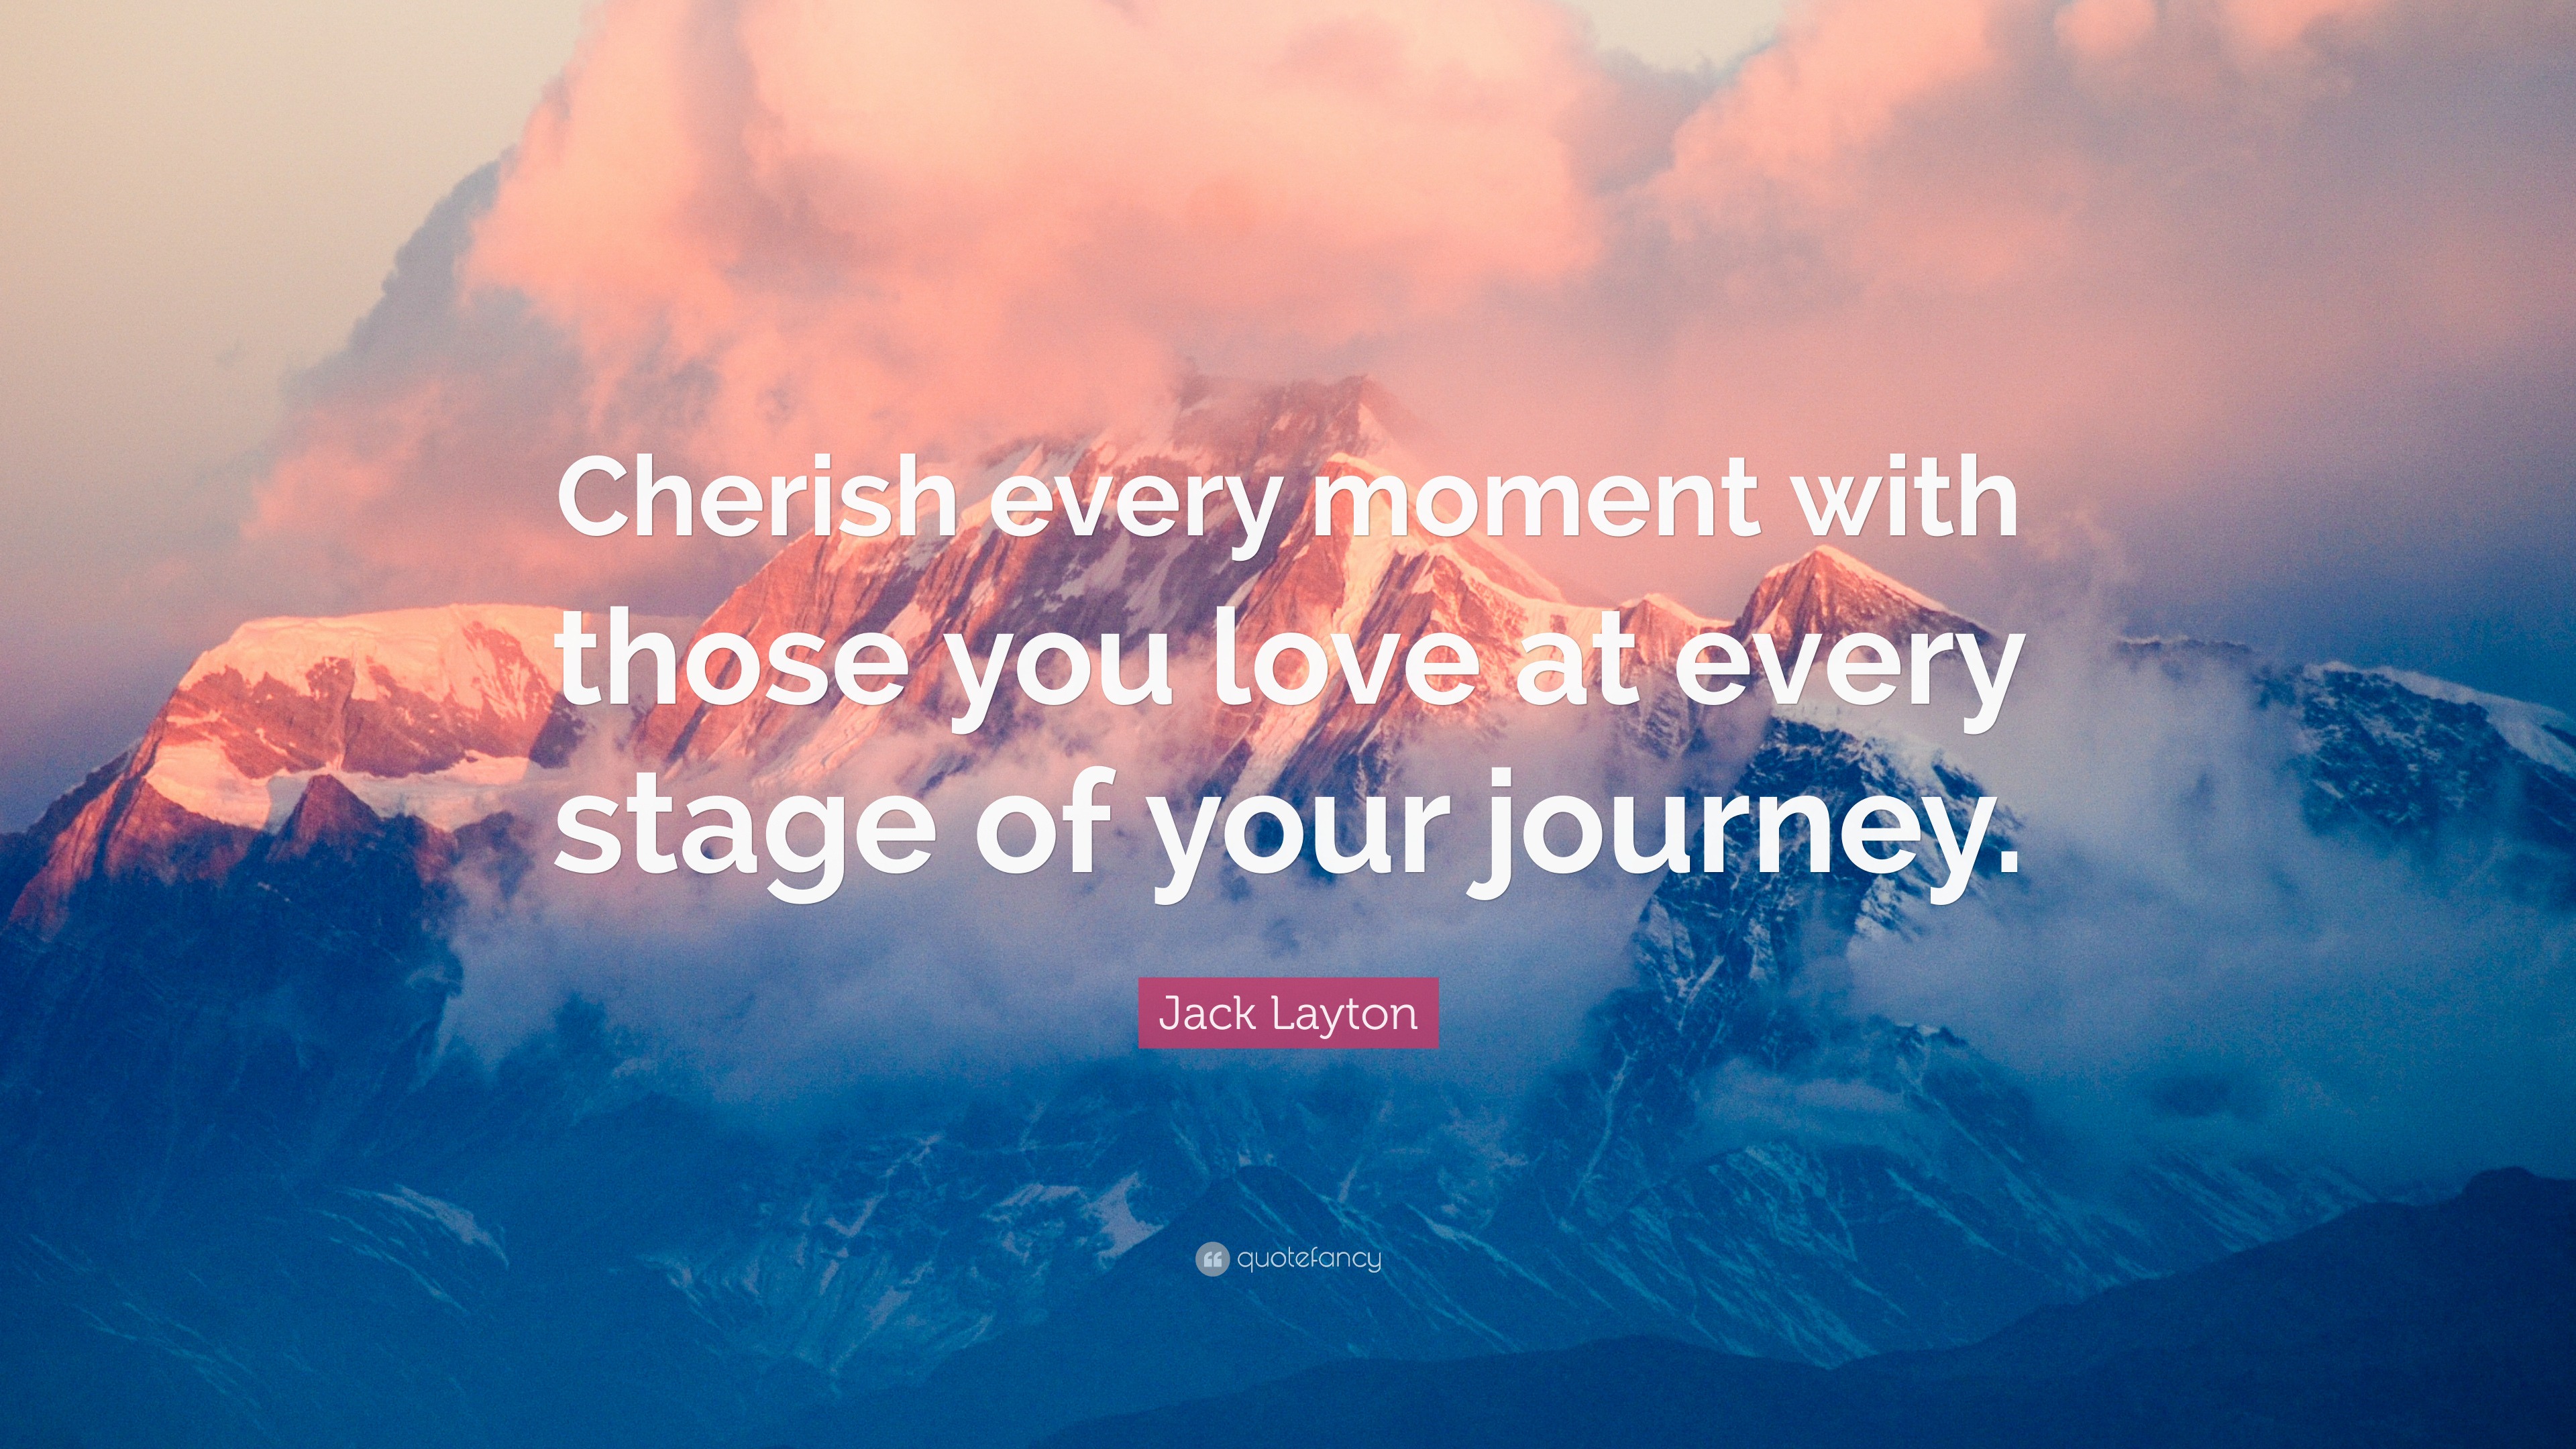 Jack Layton Quote: “Cherish every moment with those you love at